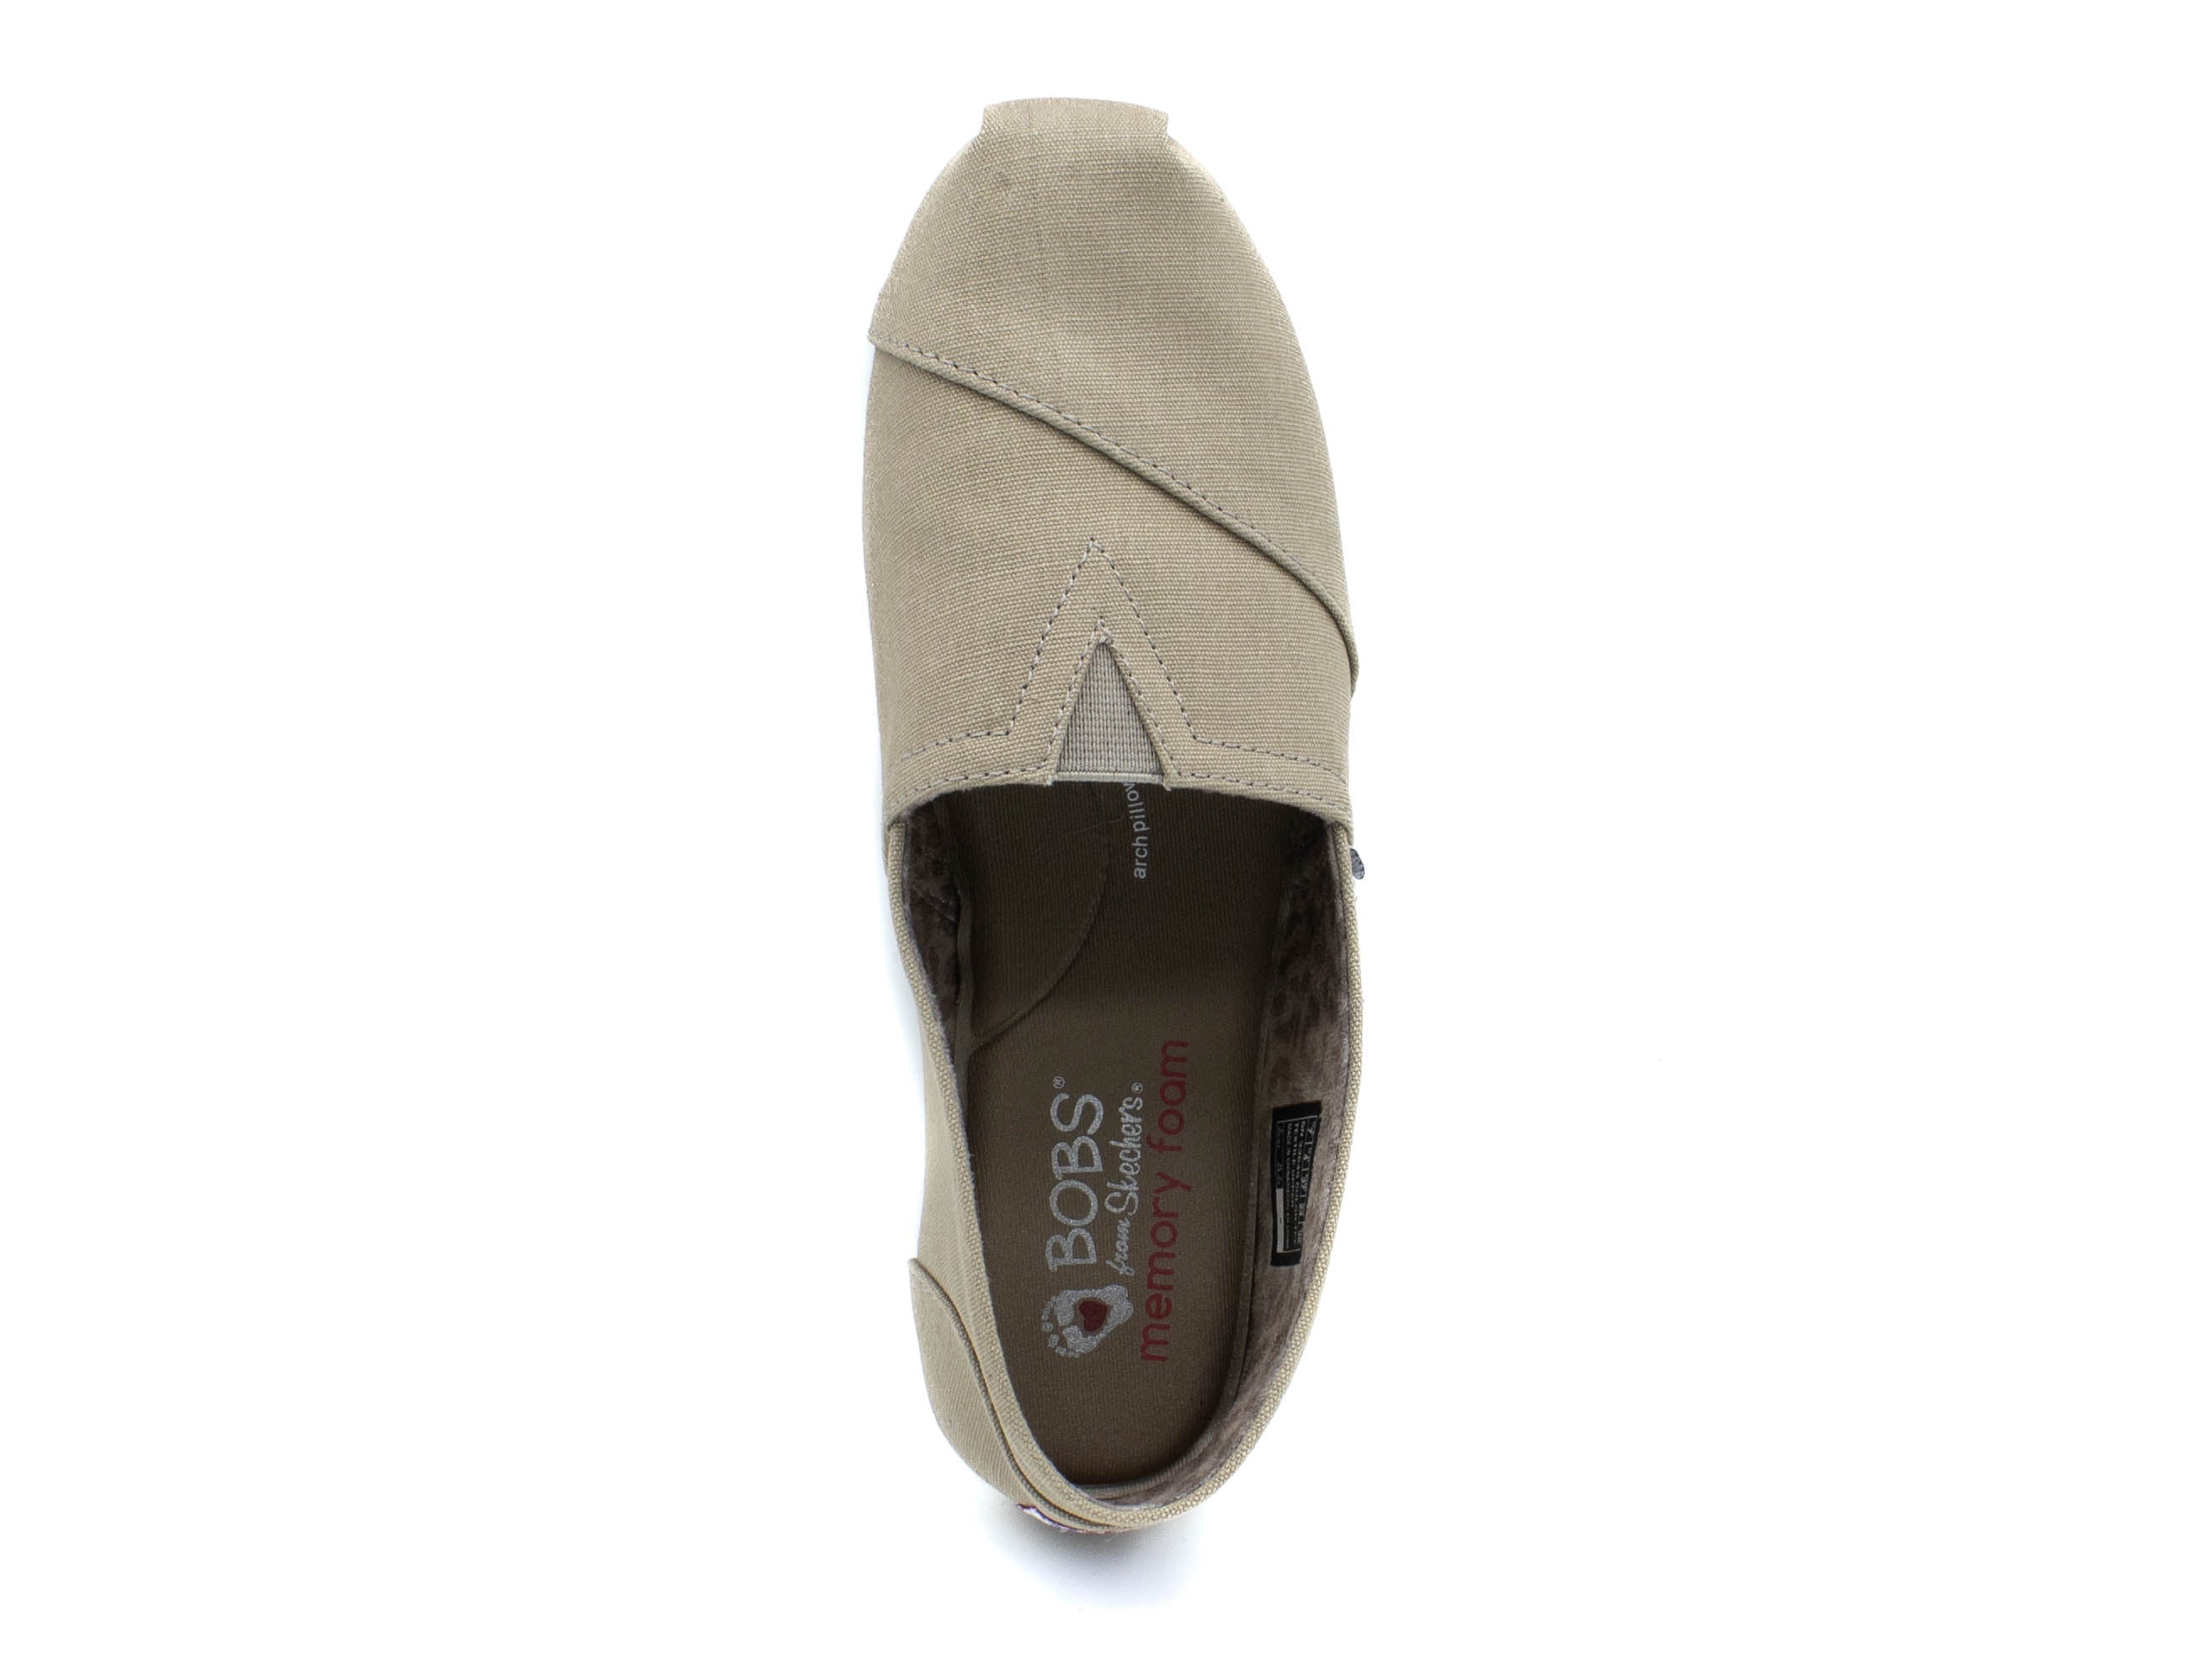 SKECHERS Bobs Plush - Peace and Love